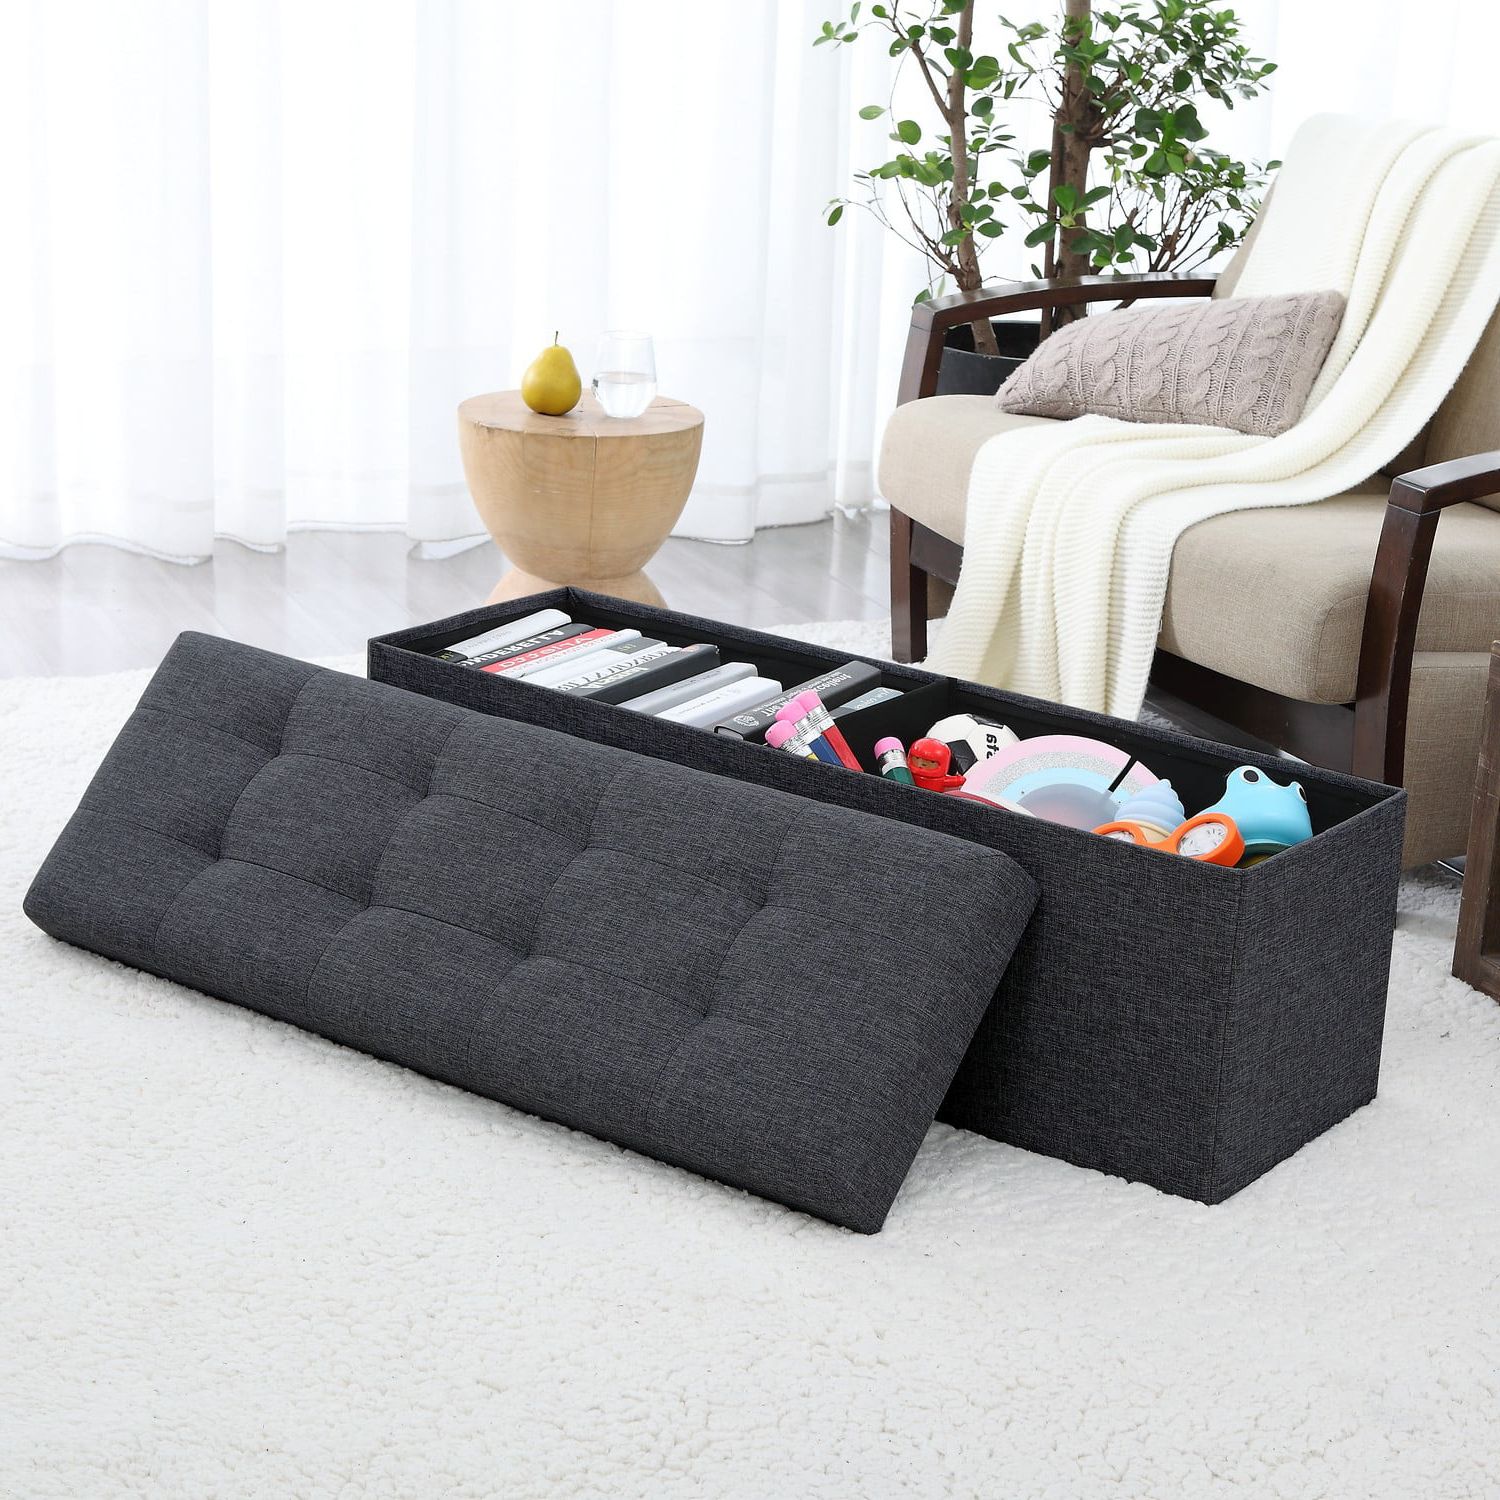 Ornavo Home Foldable Tufted Linen Large Storage Ottoman Bench Foot Rest  Stool/seat – 15" X 45" X 15" – Walmart Regarding Most Current Bench Ottomans (View 14 of 15)